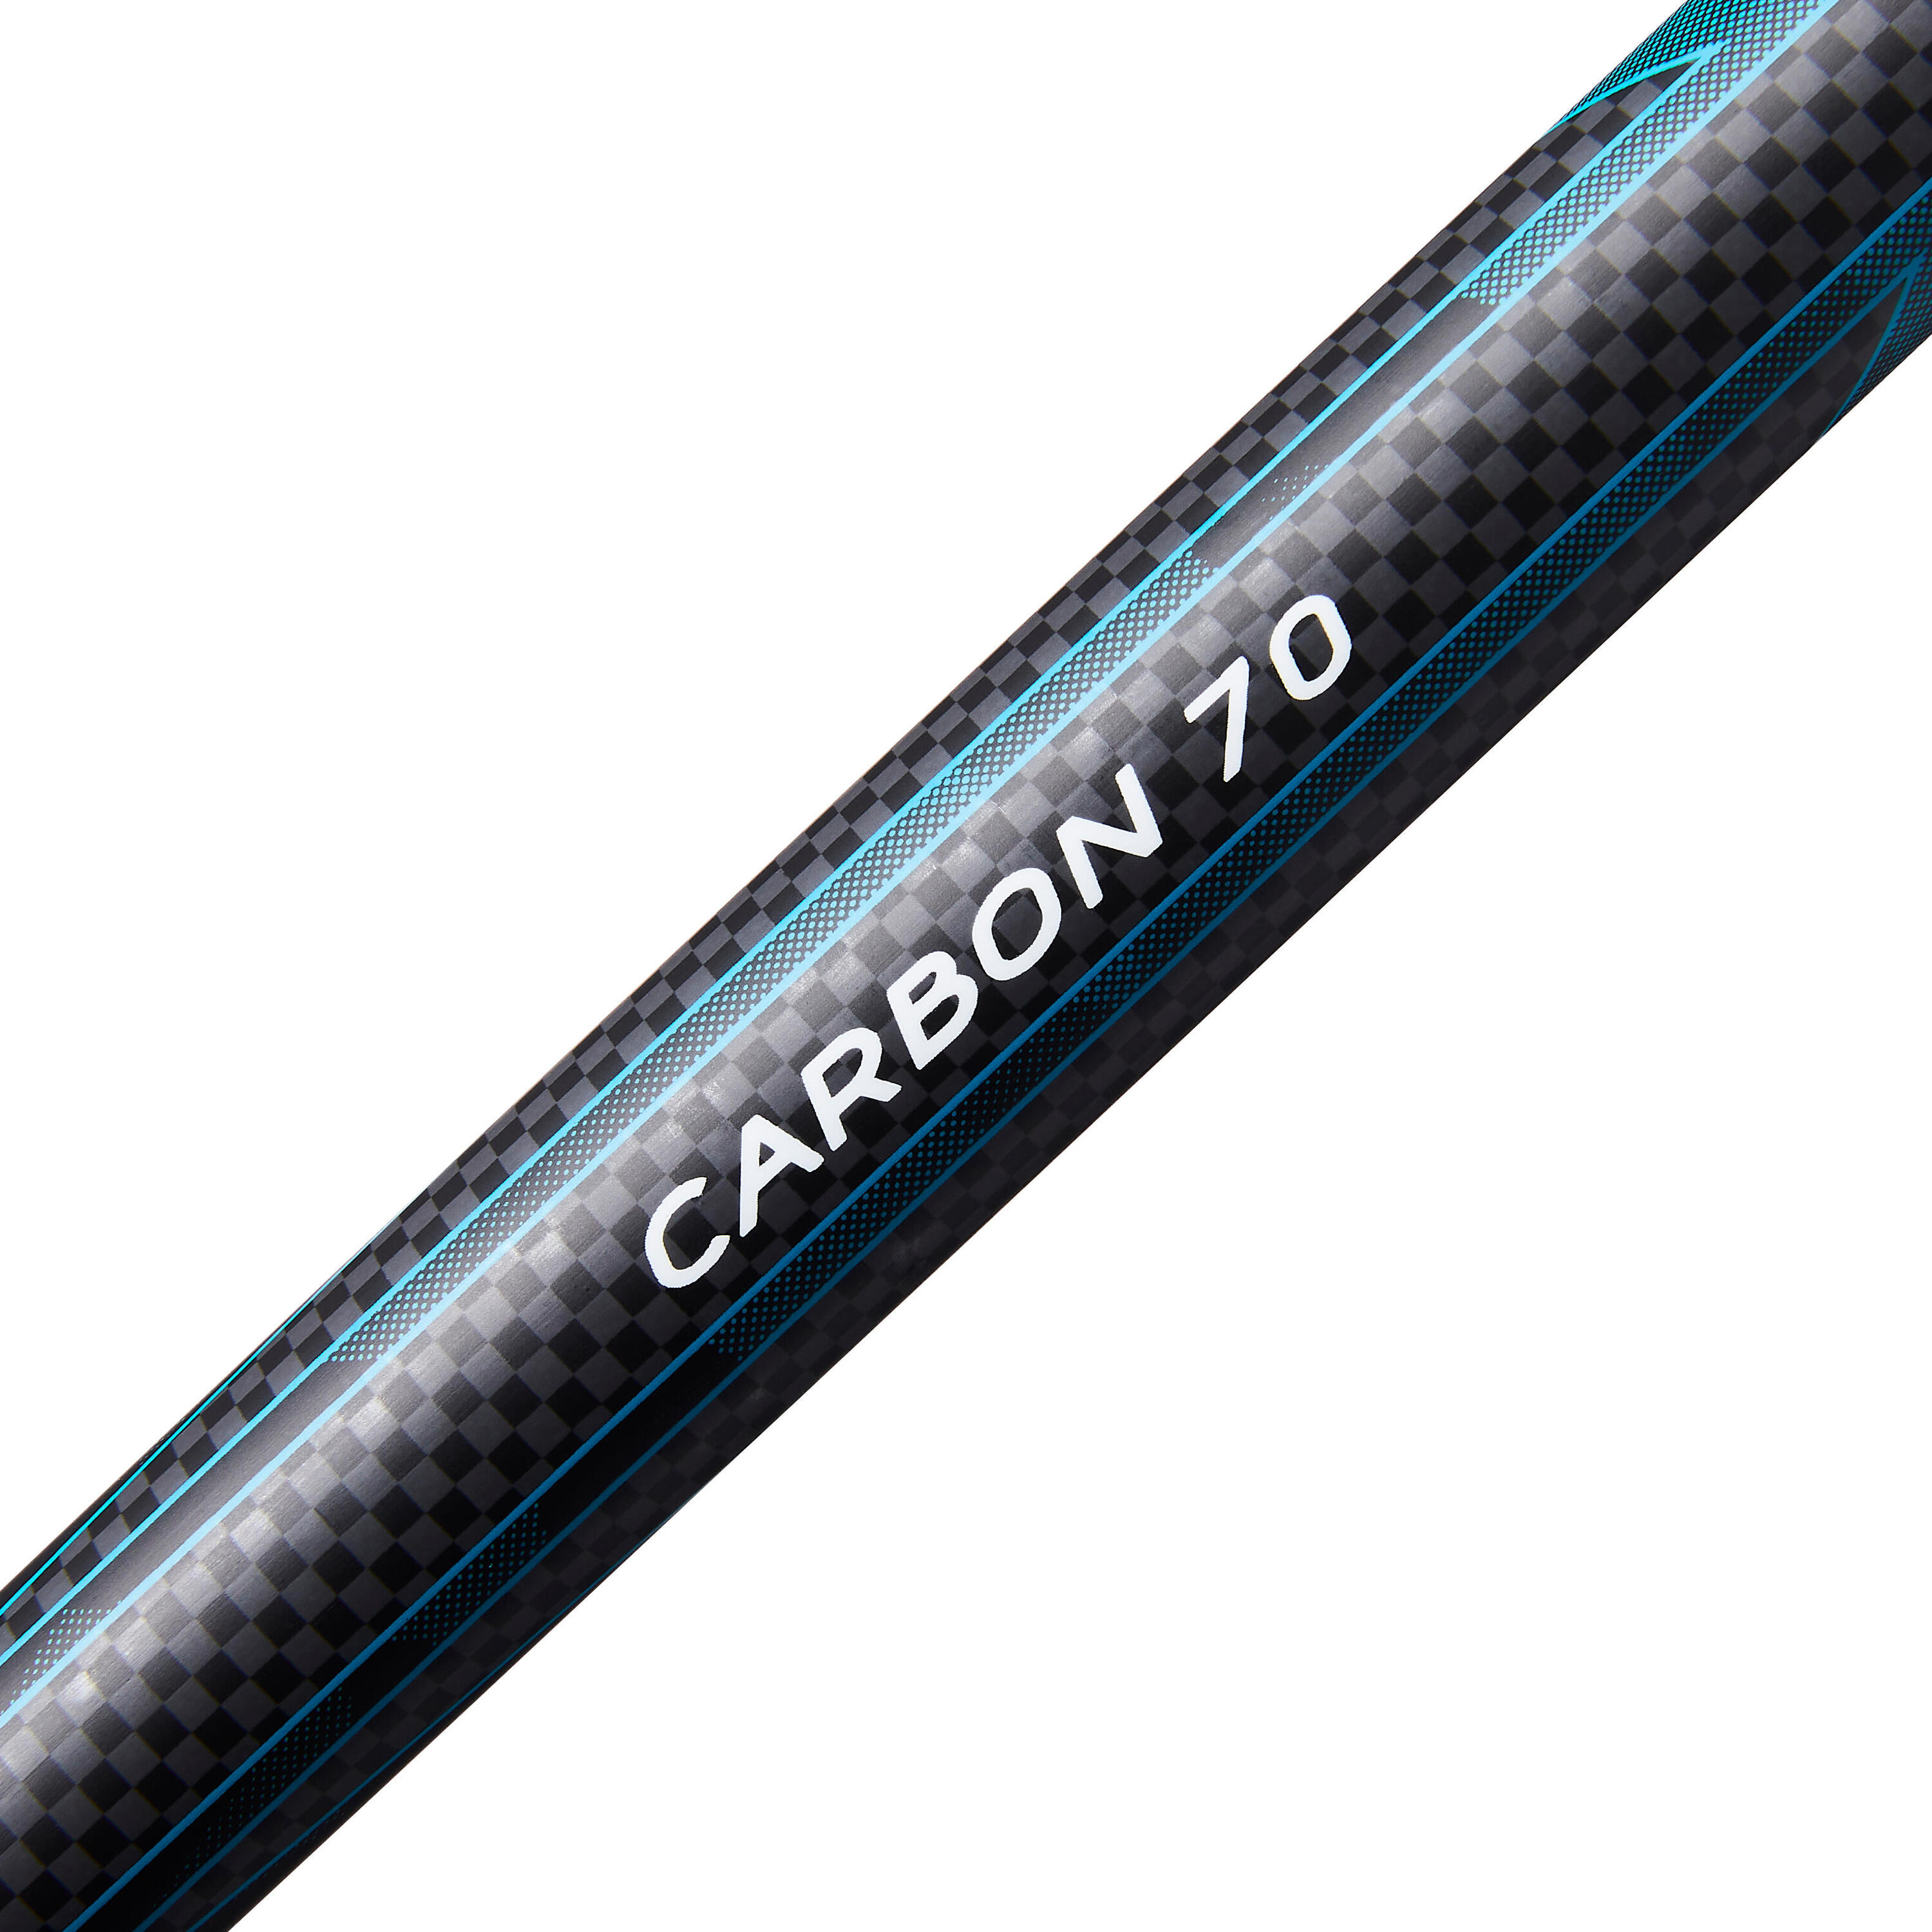 NW P700 CARBON NORDIC WALKING POLES - TURQUOISE 6/12